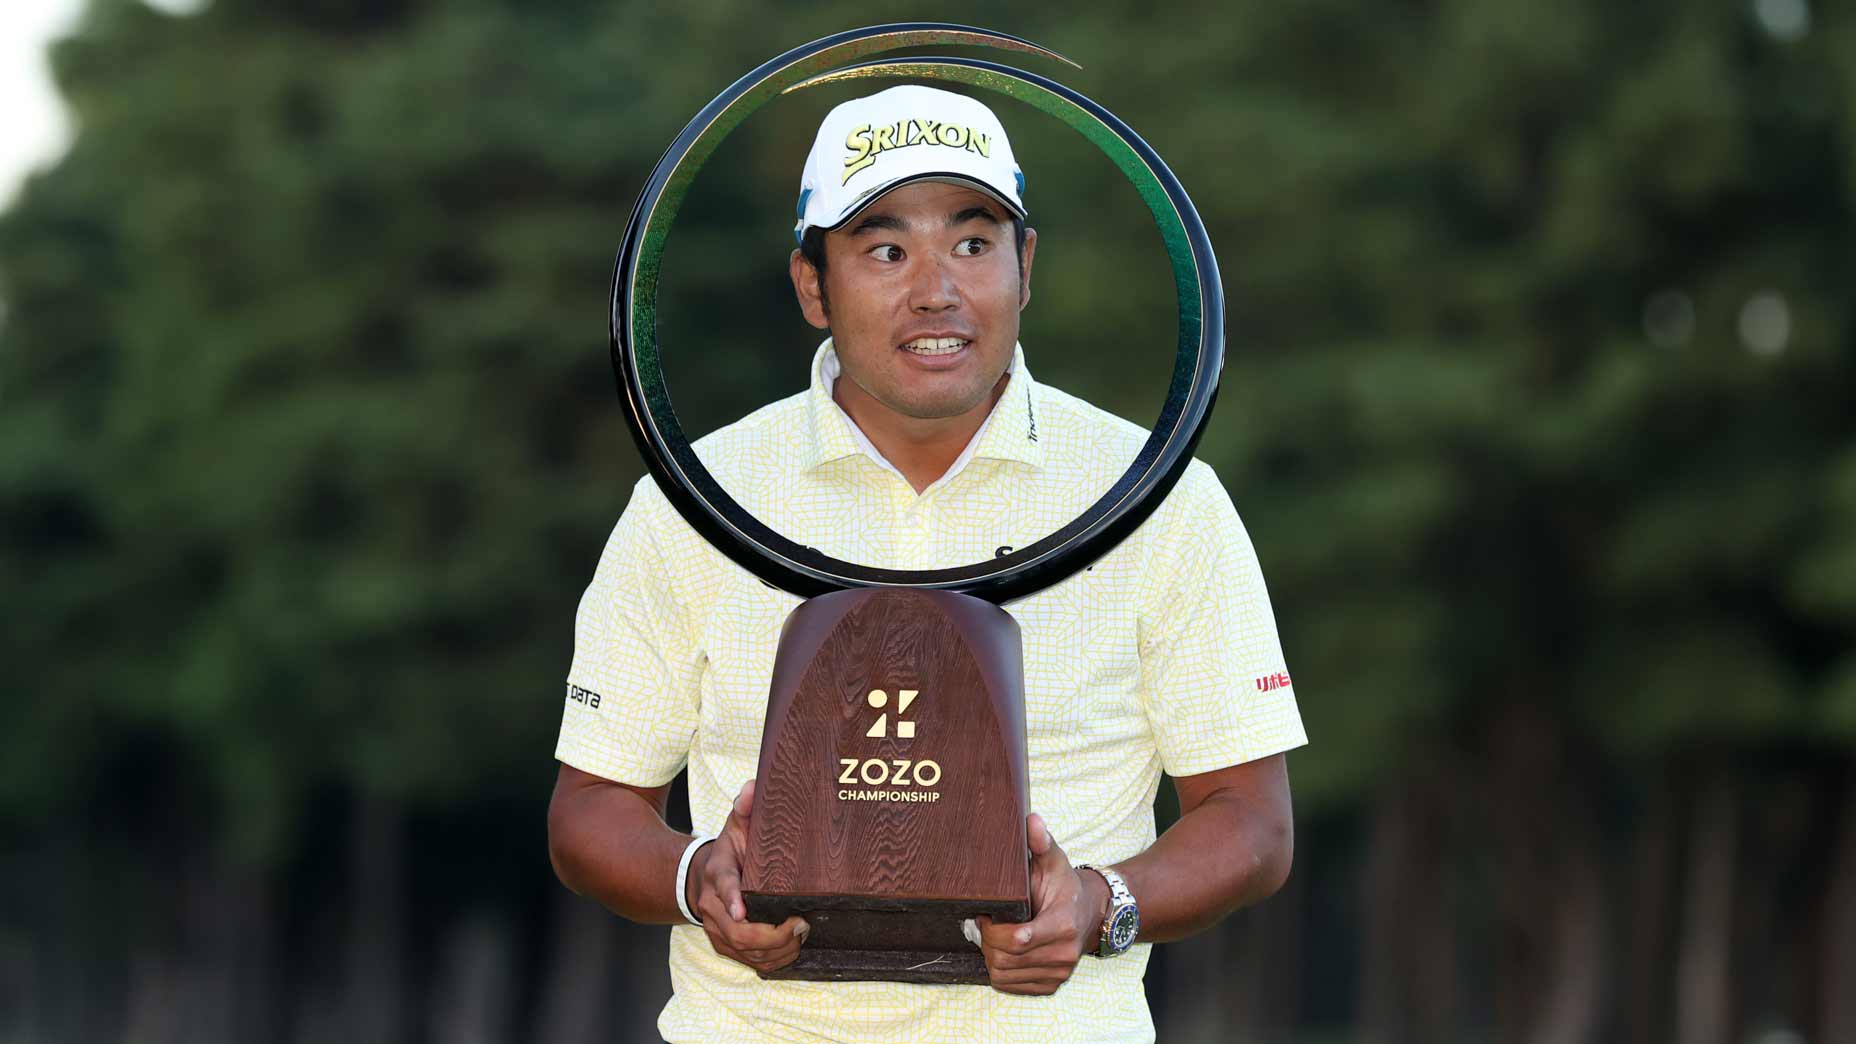 2022 Zozo Championship: TV schedule, tee times, how to watch